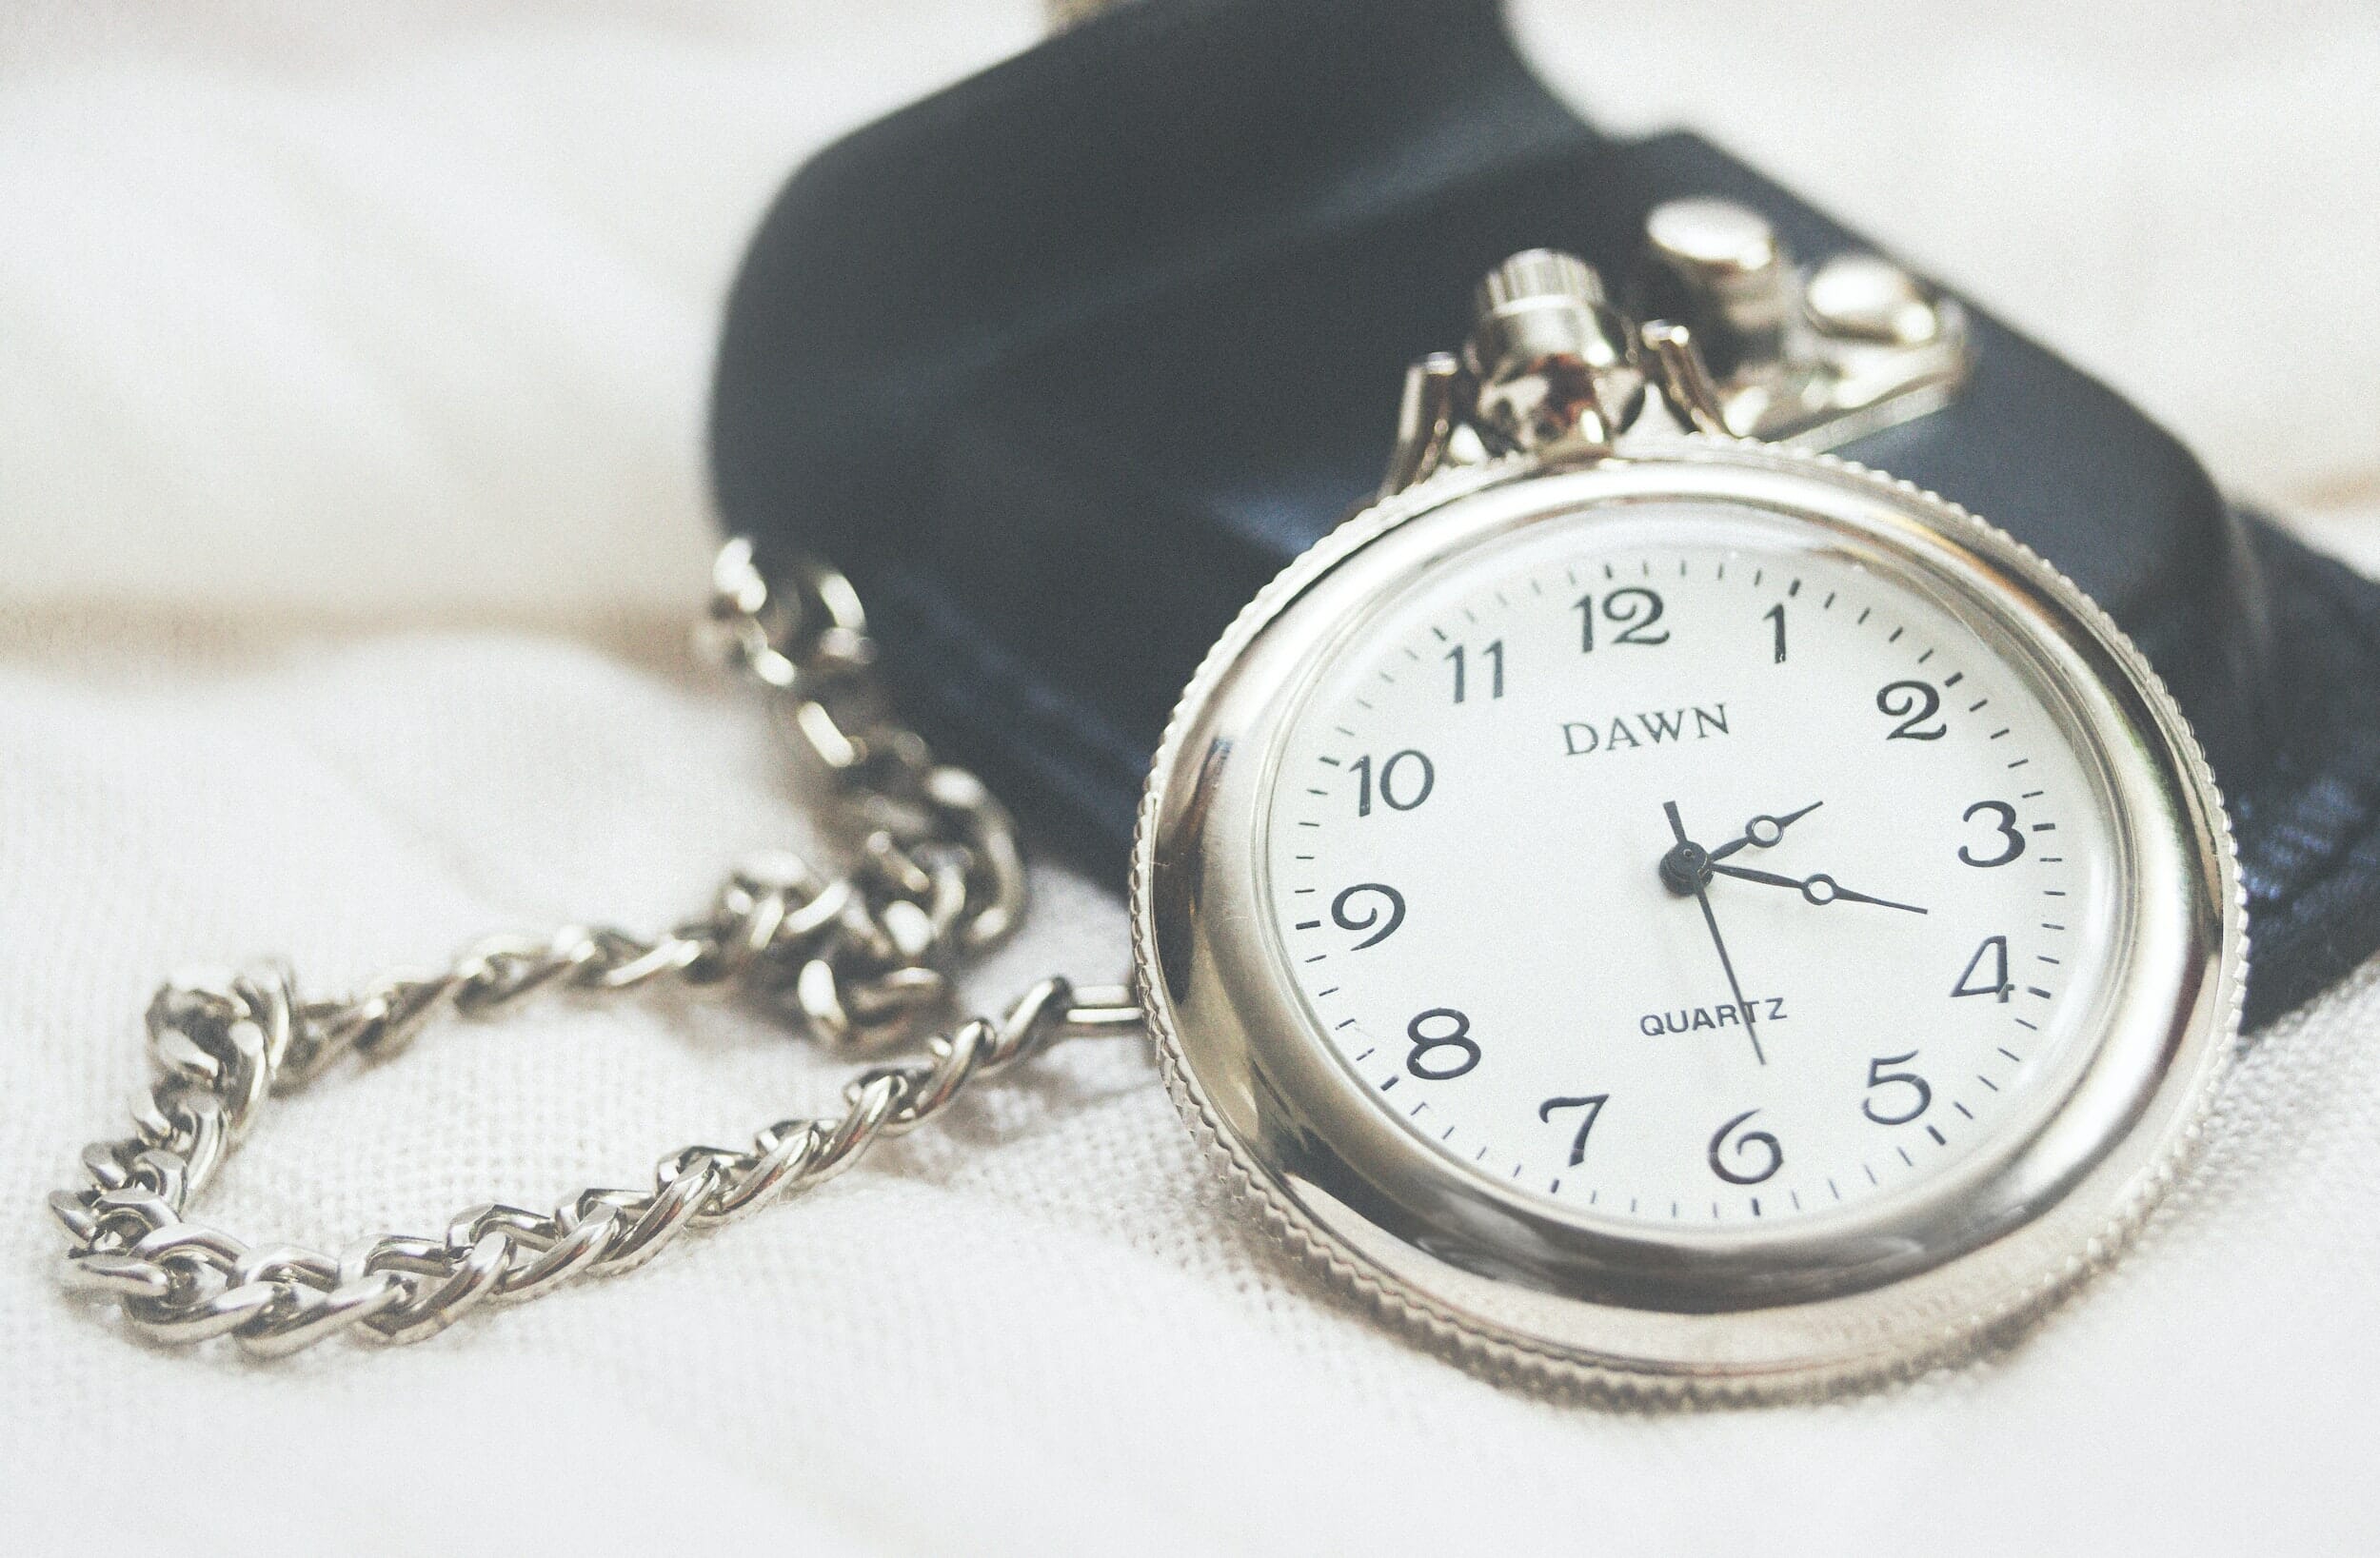 A pocket watch and a purse - Legal Design Blog Something Simple First